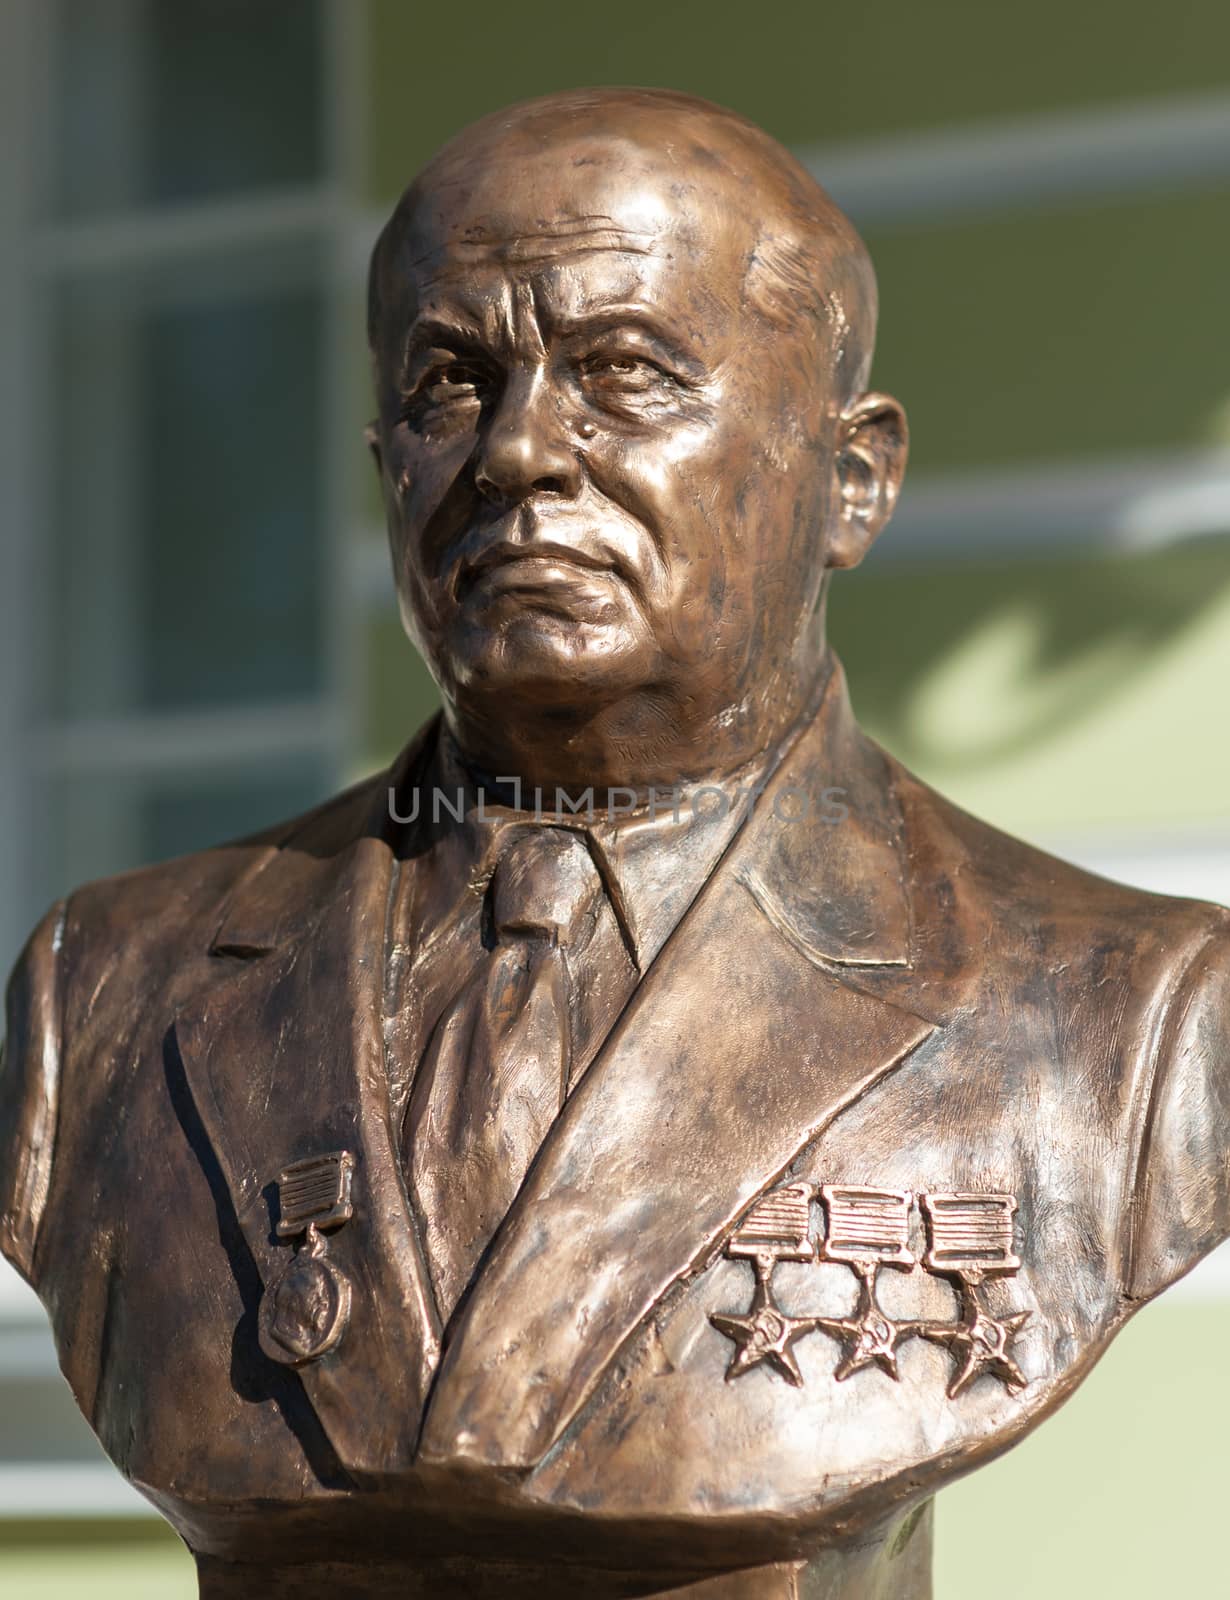 September 23, 2017 Moscow Russia Bust of General Secretary of the CPSU Central Committee Nikita Khrushchev made by Zurab Tsereteli on the Rulers Alley in Moscow.